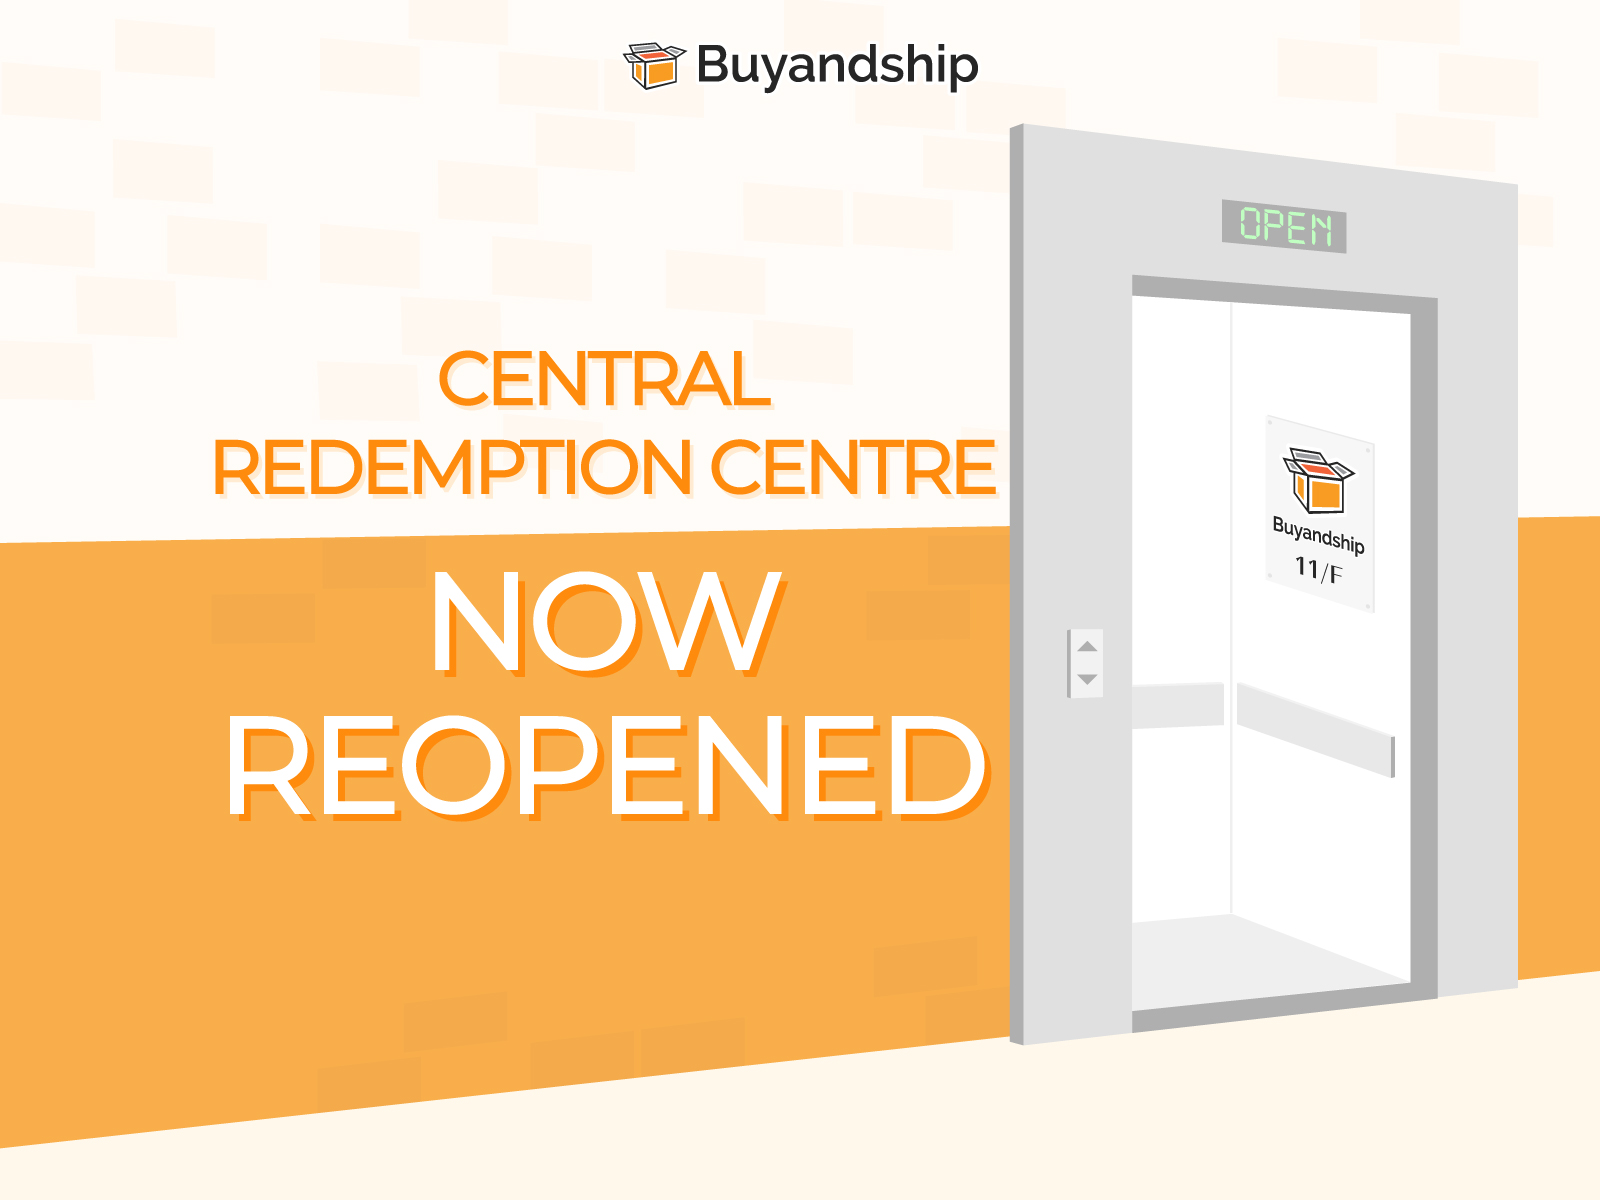 Central Redemption Centre Now Reopened